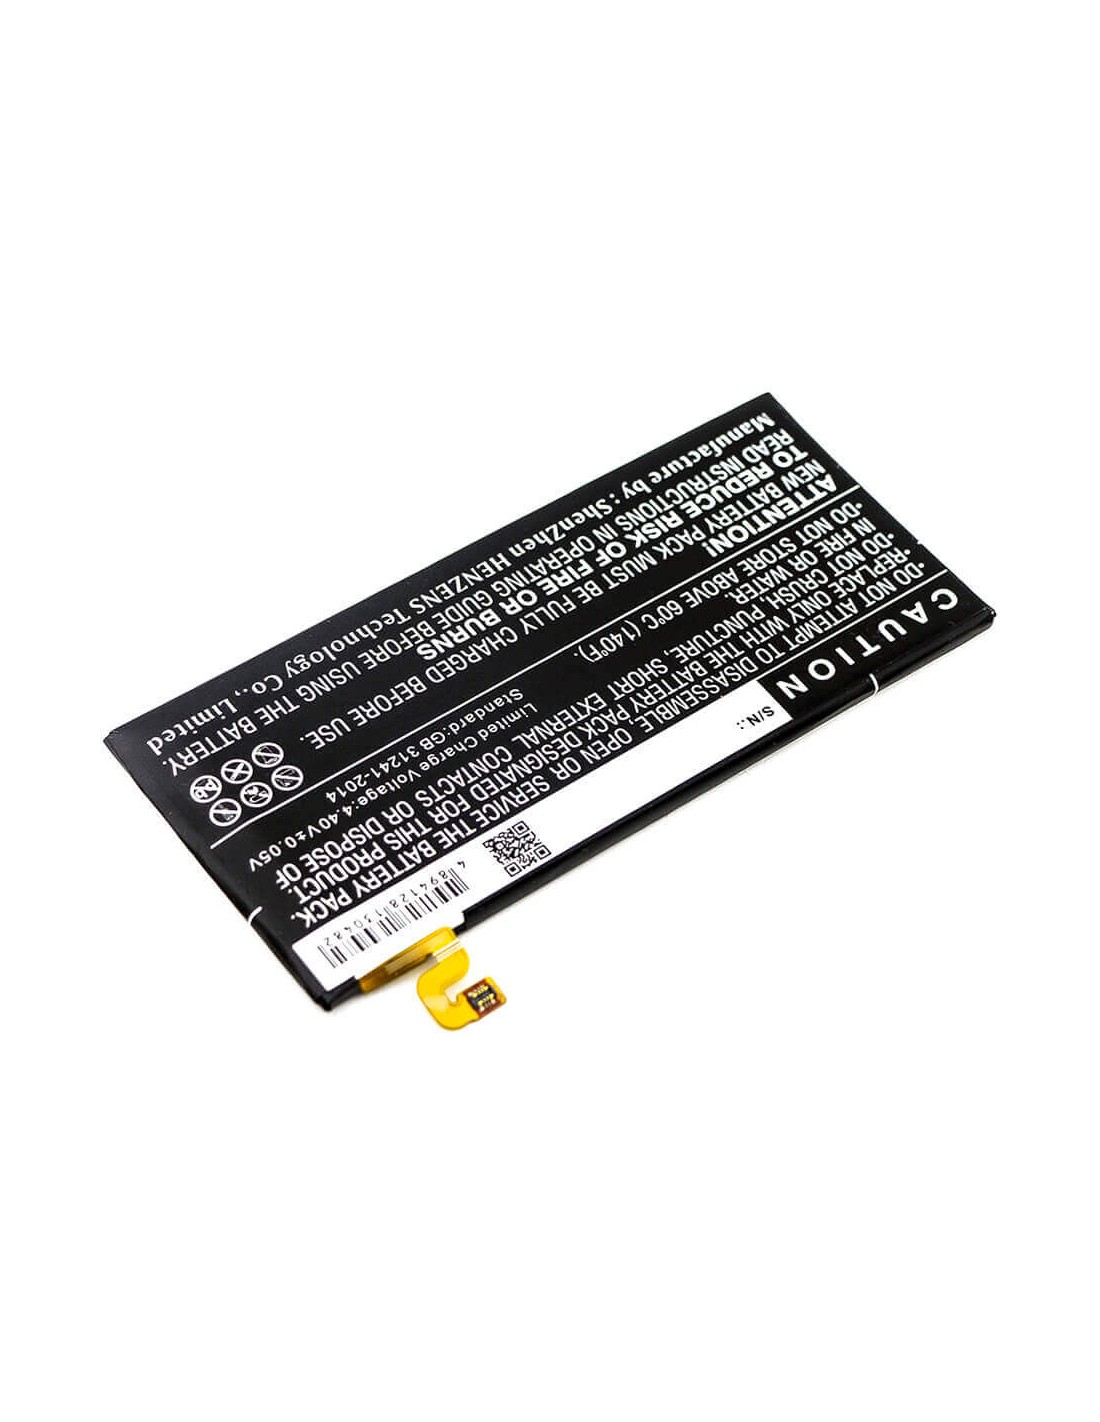 Battery for Samsung Galaxy A8 2016, Sm-a810f/ds, Galaxy A8 2016 Duos Td-lte 3.85V, 3300mAh - 12.71Wh